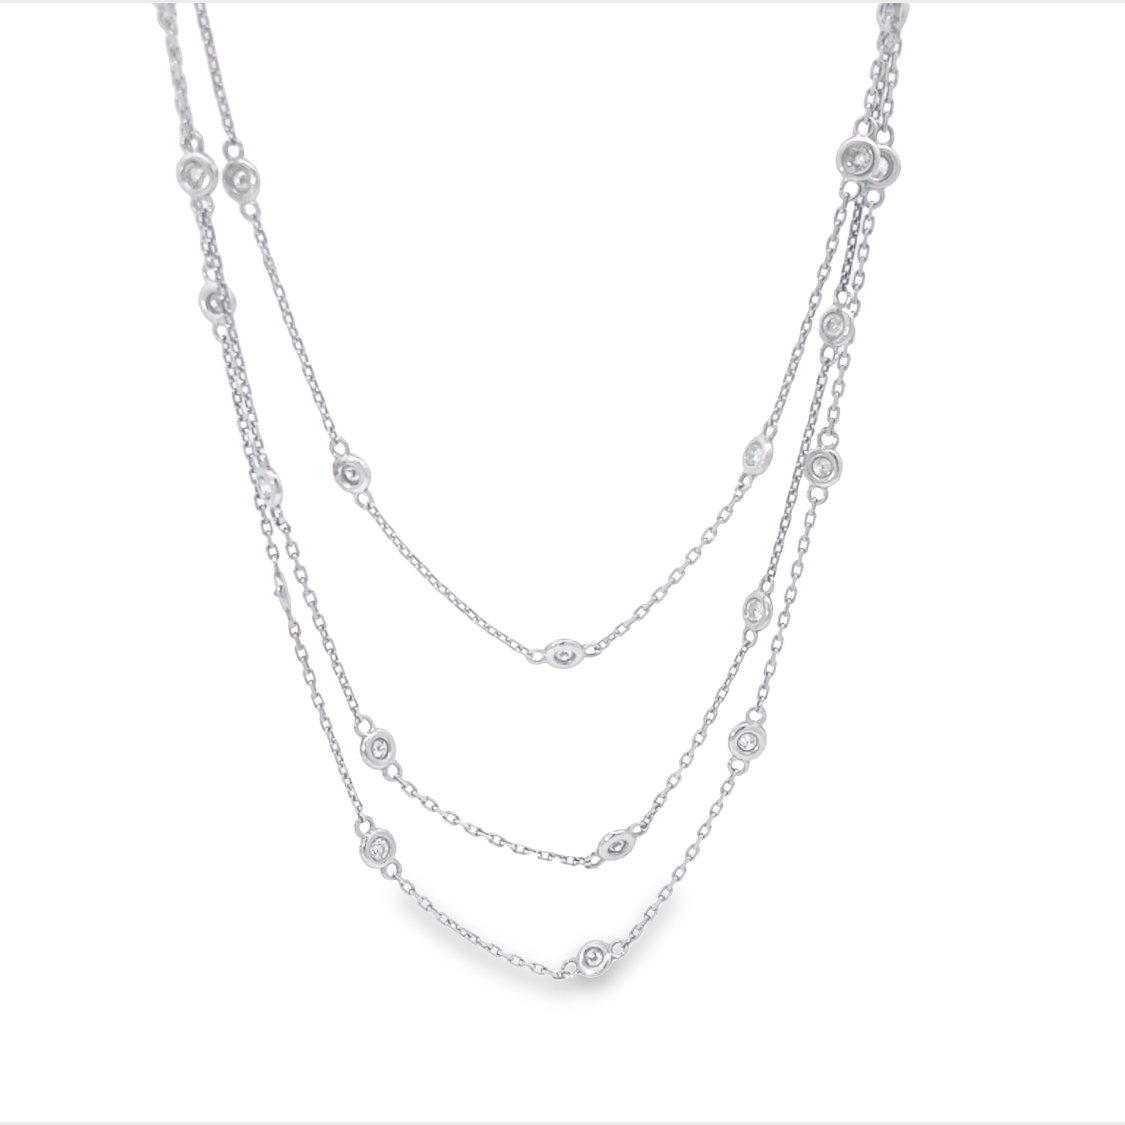 18K White Gold Diamonds by the Yard Necklace with 32 Round Brilliant Cut Diamonds1.50 Tcw G-H SI1